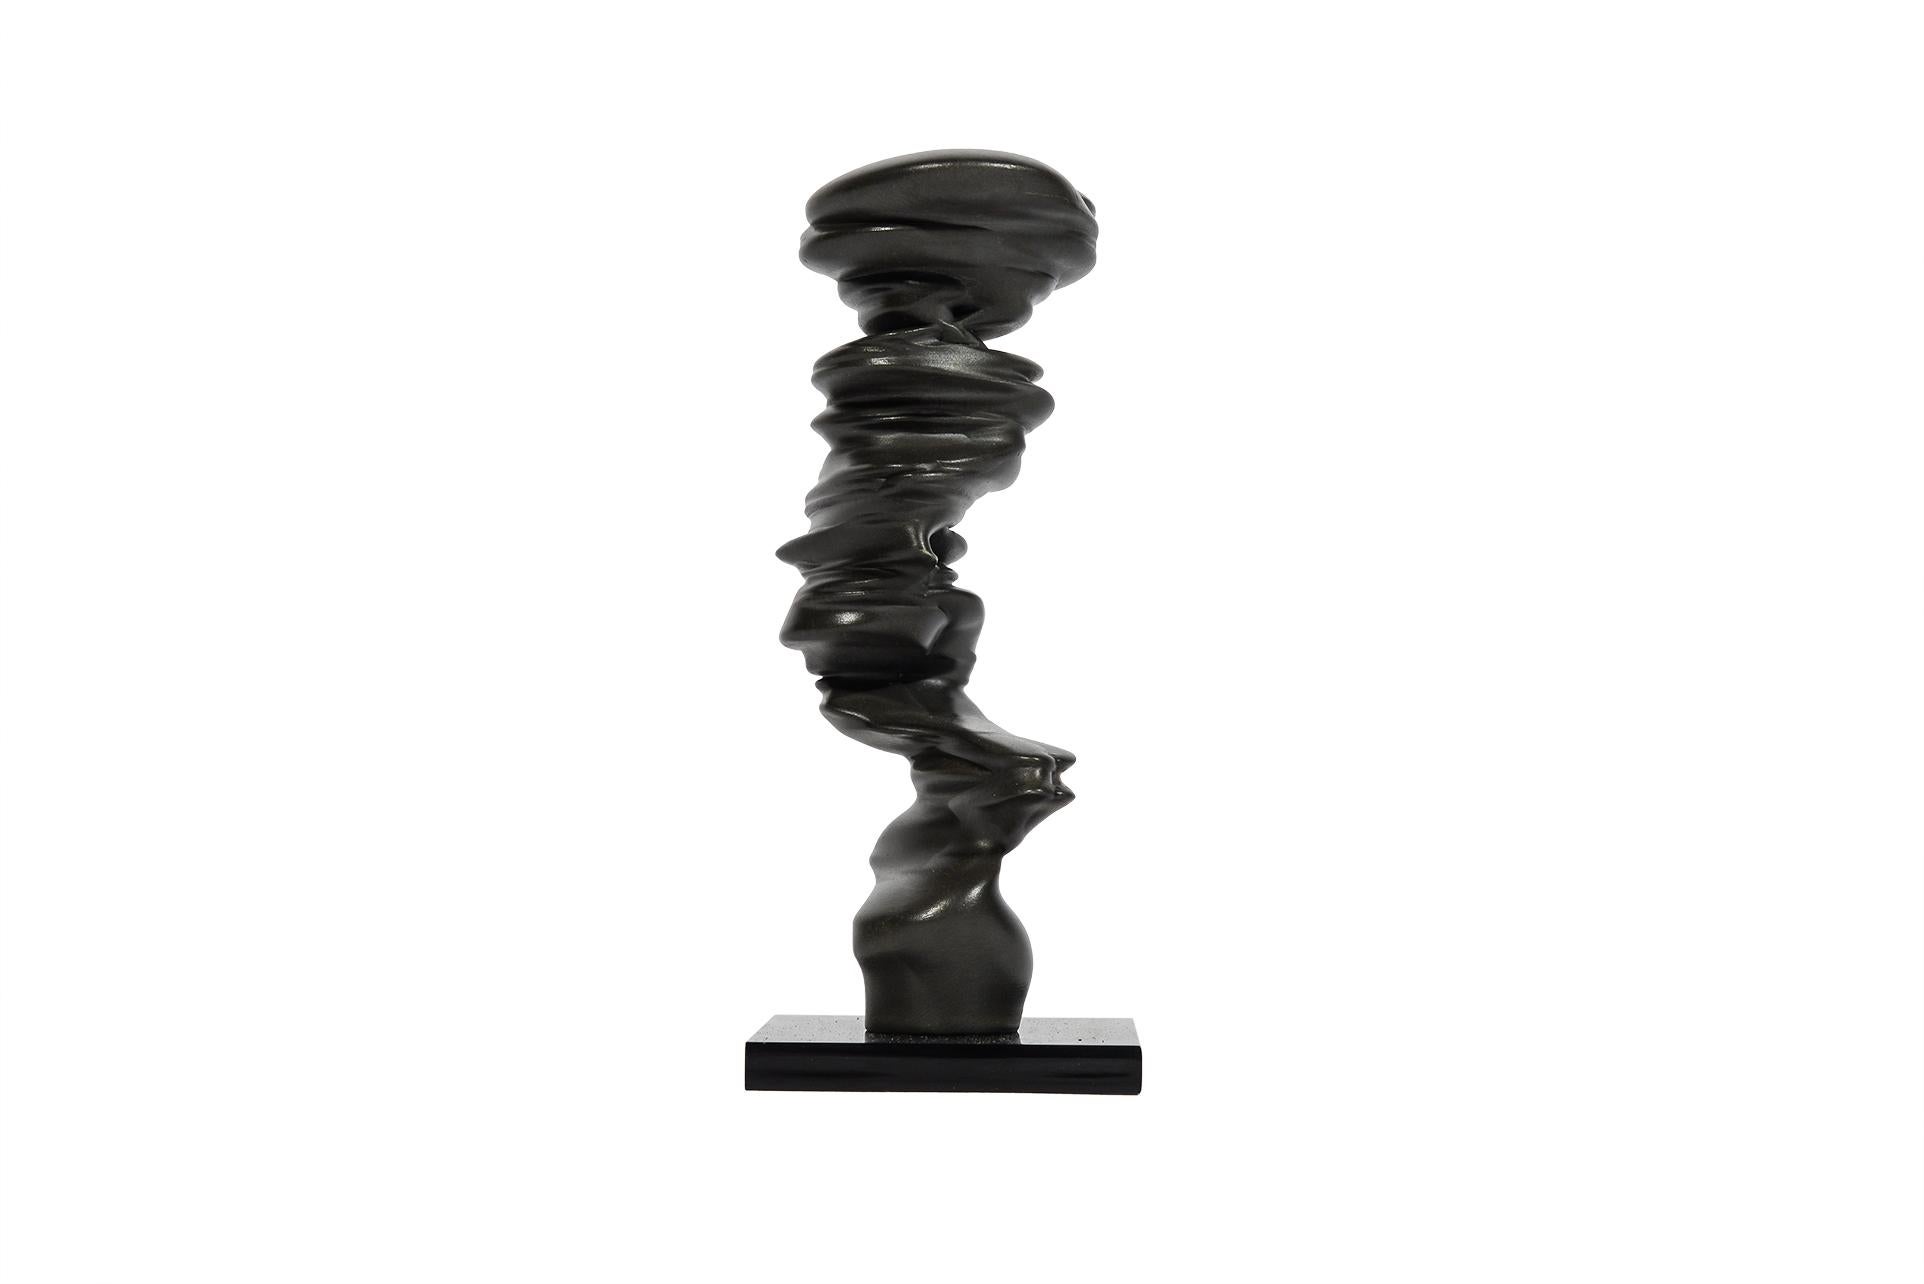 Tony Cragg (1949), Bust sculpture,
Bronze and plexiglas,
circa 2017, England.

Measures: Height 15 cm, base 6.6 cm x 6.5 cm.
“Certificate of Authenticity”.

Tony Cragg realizes large compositions and works in which volume asserts itself: